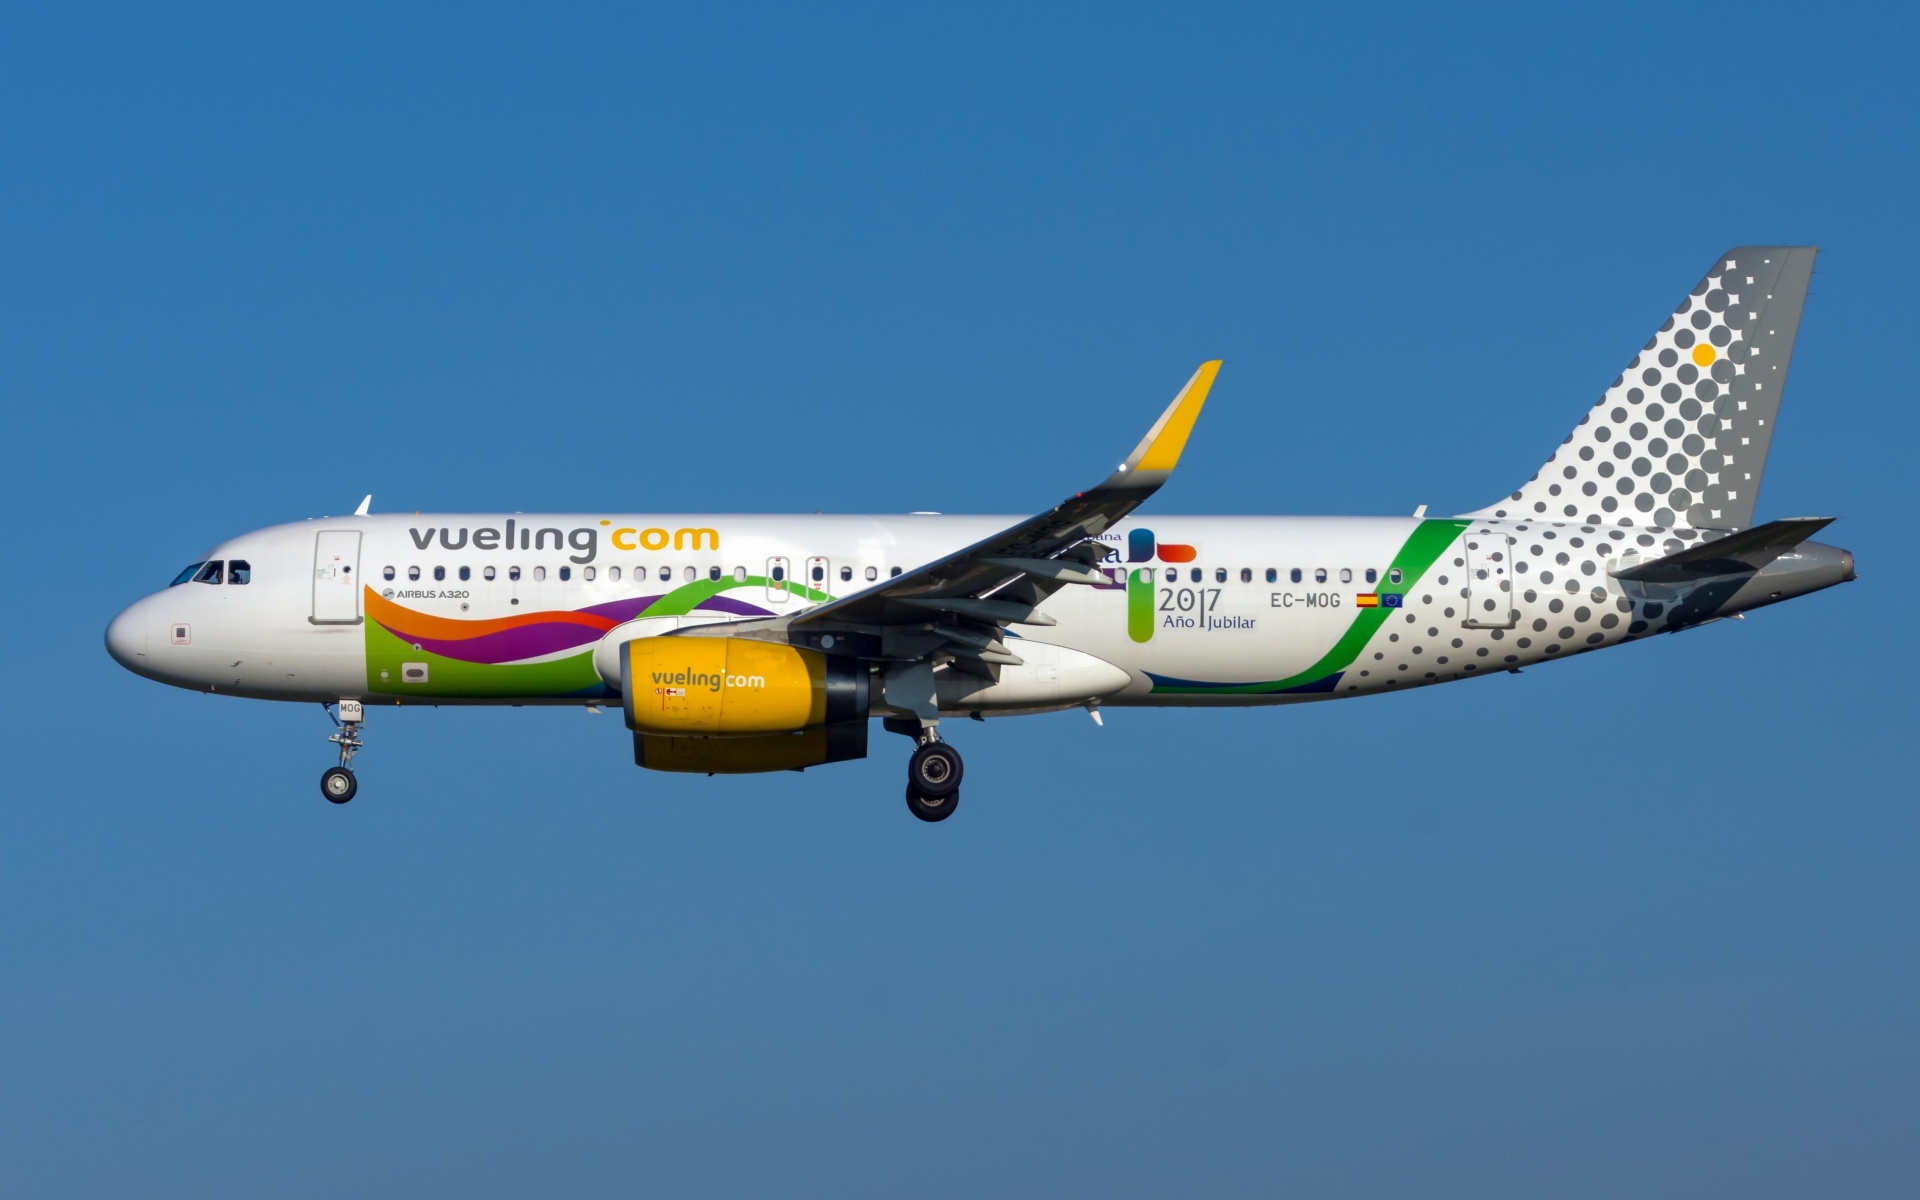 Airbus A320 Vueling Airlines wallpaper 1920x1200